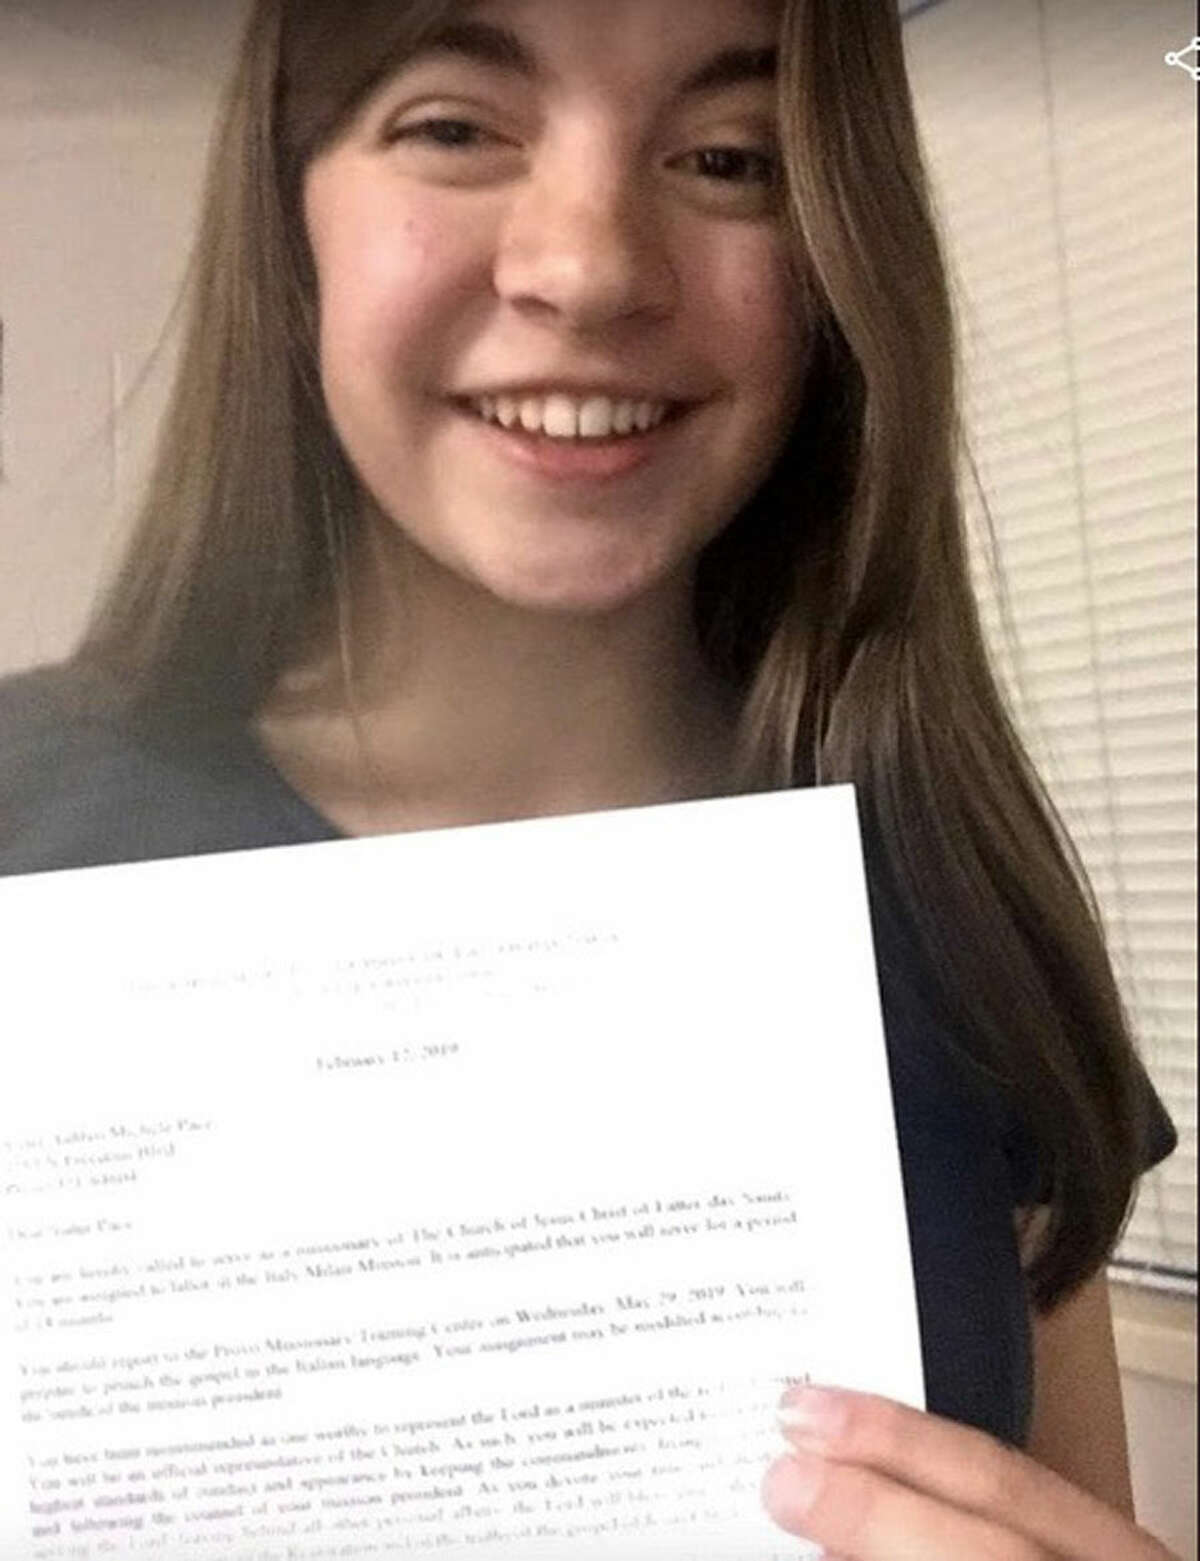 Ashlyn Pace will serve an 18-month mission in Milan, Italy, for the Church of Jesus Christ of Latter-day Saints. Contributed photo